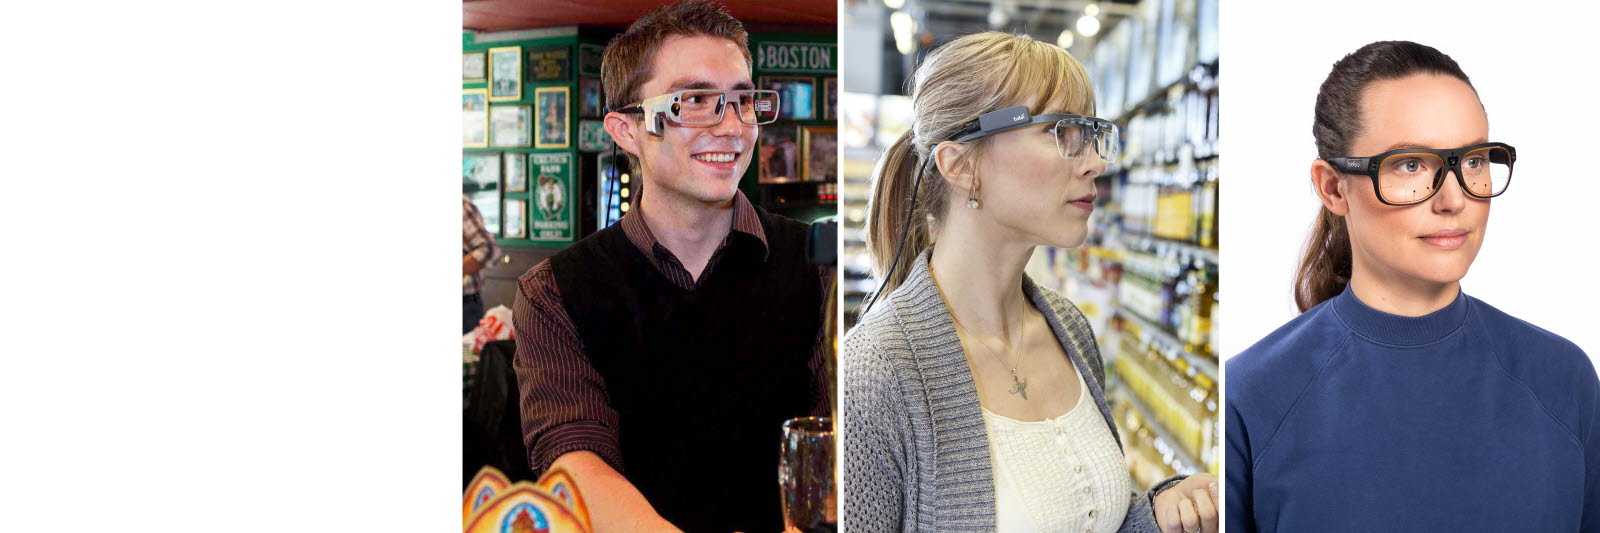 Tobii Pro Glasses 1, 2 and 3 - History of wearable eye trackers